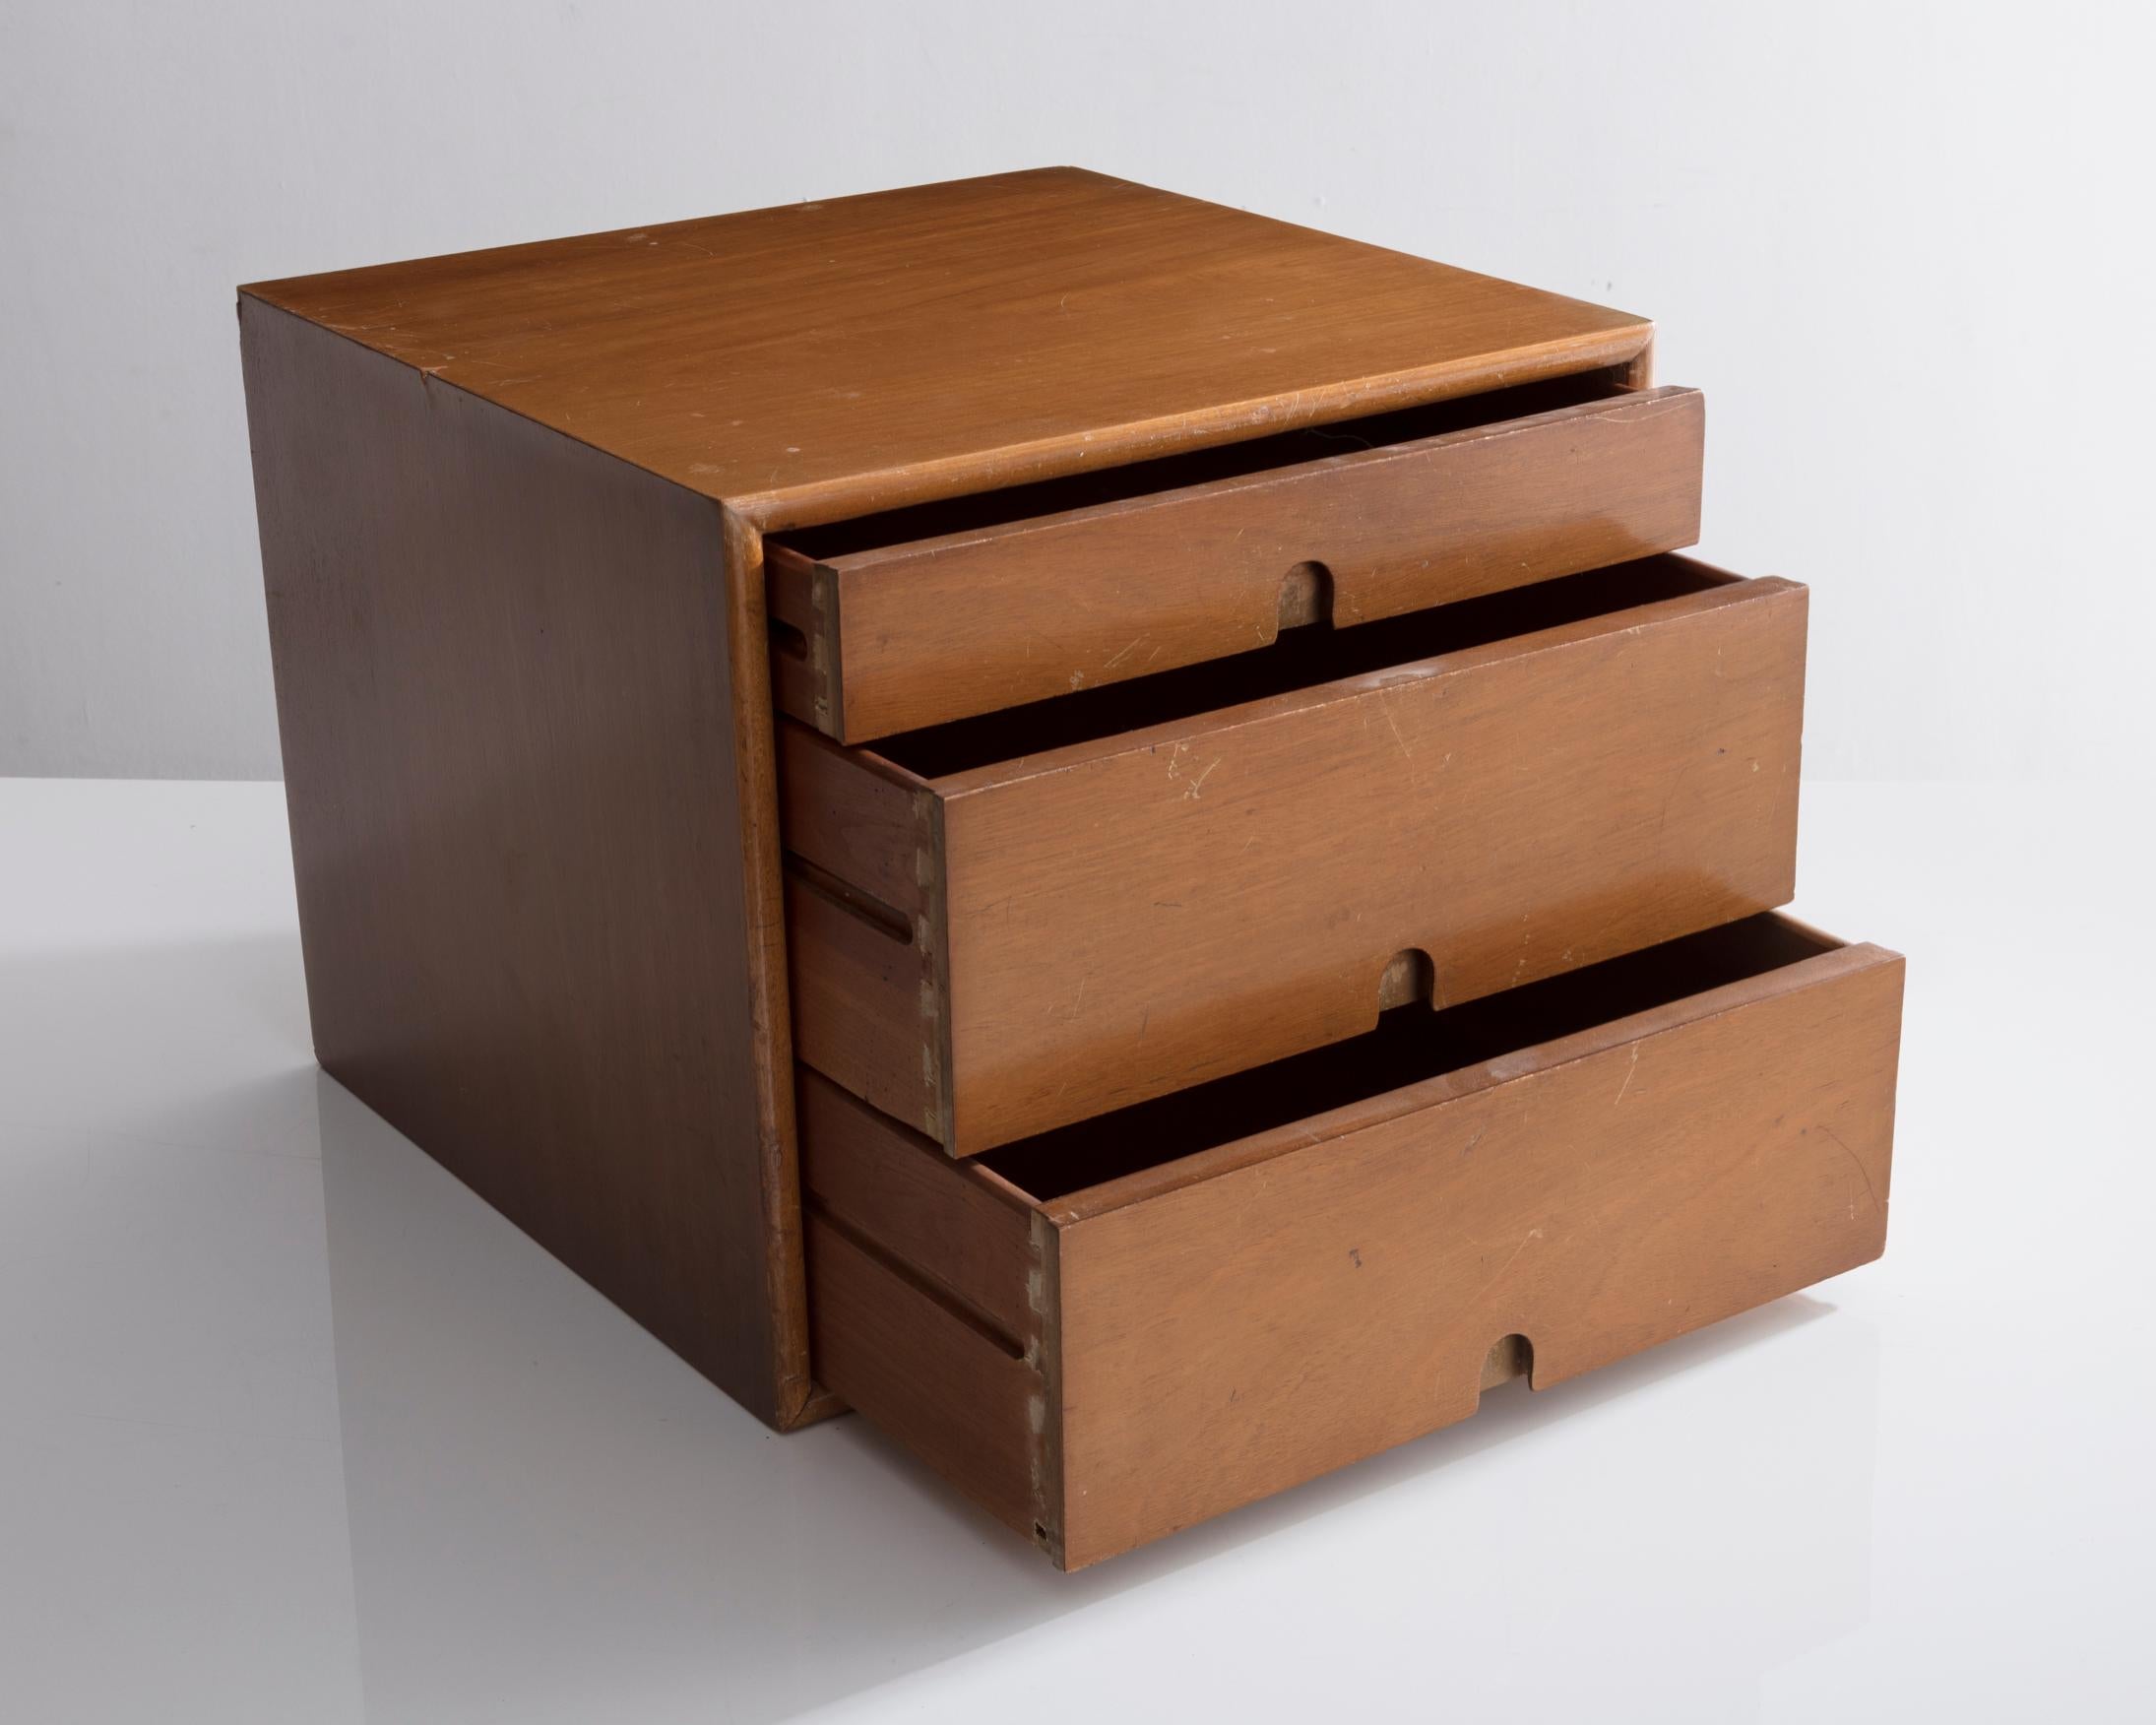 Five-drawer cabinet for the organic design competition. 1940. Manufactured by Red Lion Furniture Co., York, PA. Honduran Mahogany. Provenance: Collection of Mark McDonald. Exhibited: Eames Design: Charles and Ray Eames, Tokyo Metropolitan Art